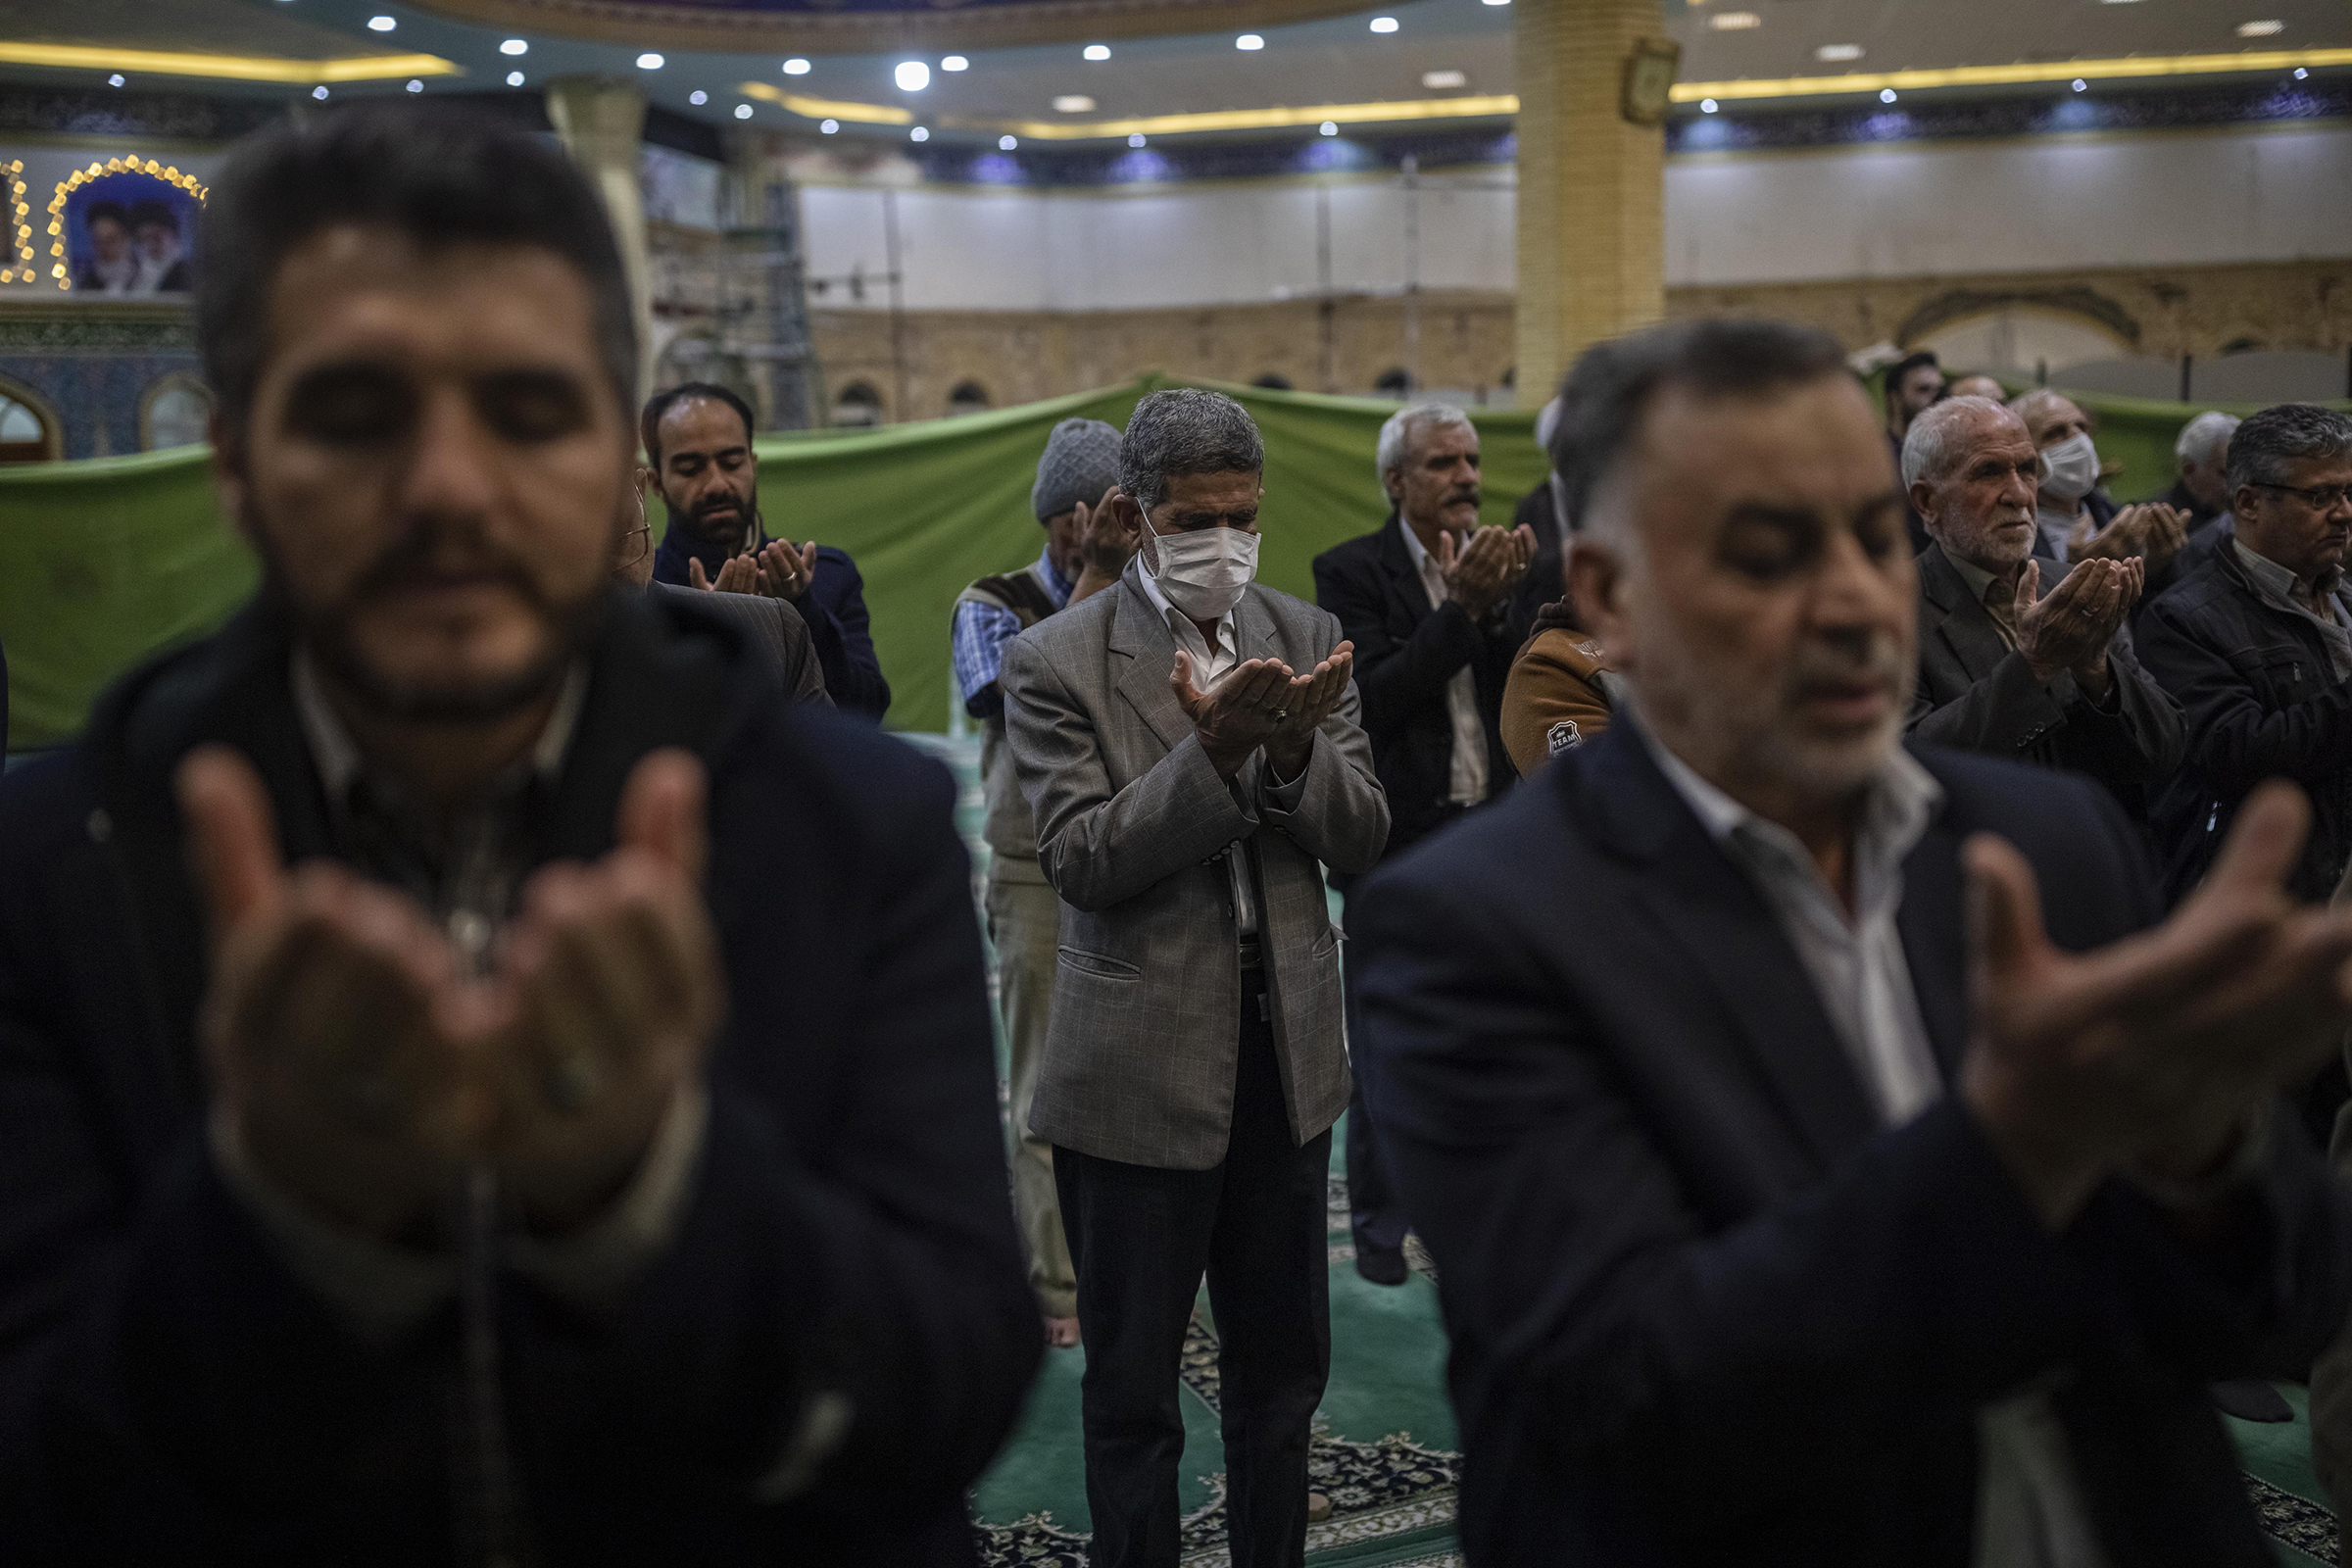 Iranian man are praying with or without a protective face mask in a mosque, while Iran's government said Monday that 12 people had died nationwide from the new coronavirus, rejecting claims of a much higher death toll by a lawmaker from the city of Qom that has been at the epicenter of the virus in the country, whereas the cities of Arak and Qom have the highest rate of virus infection.